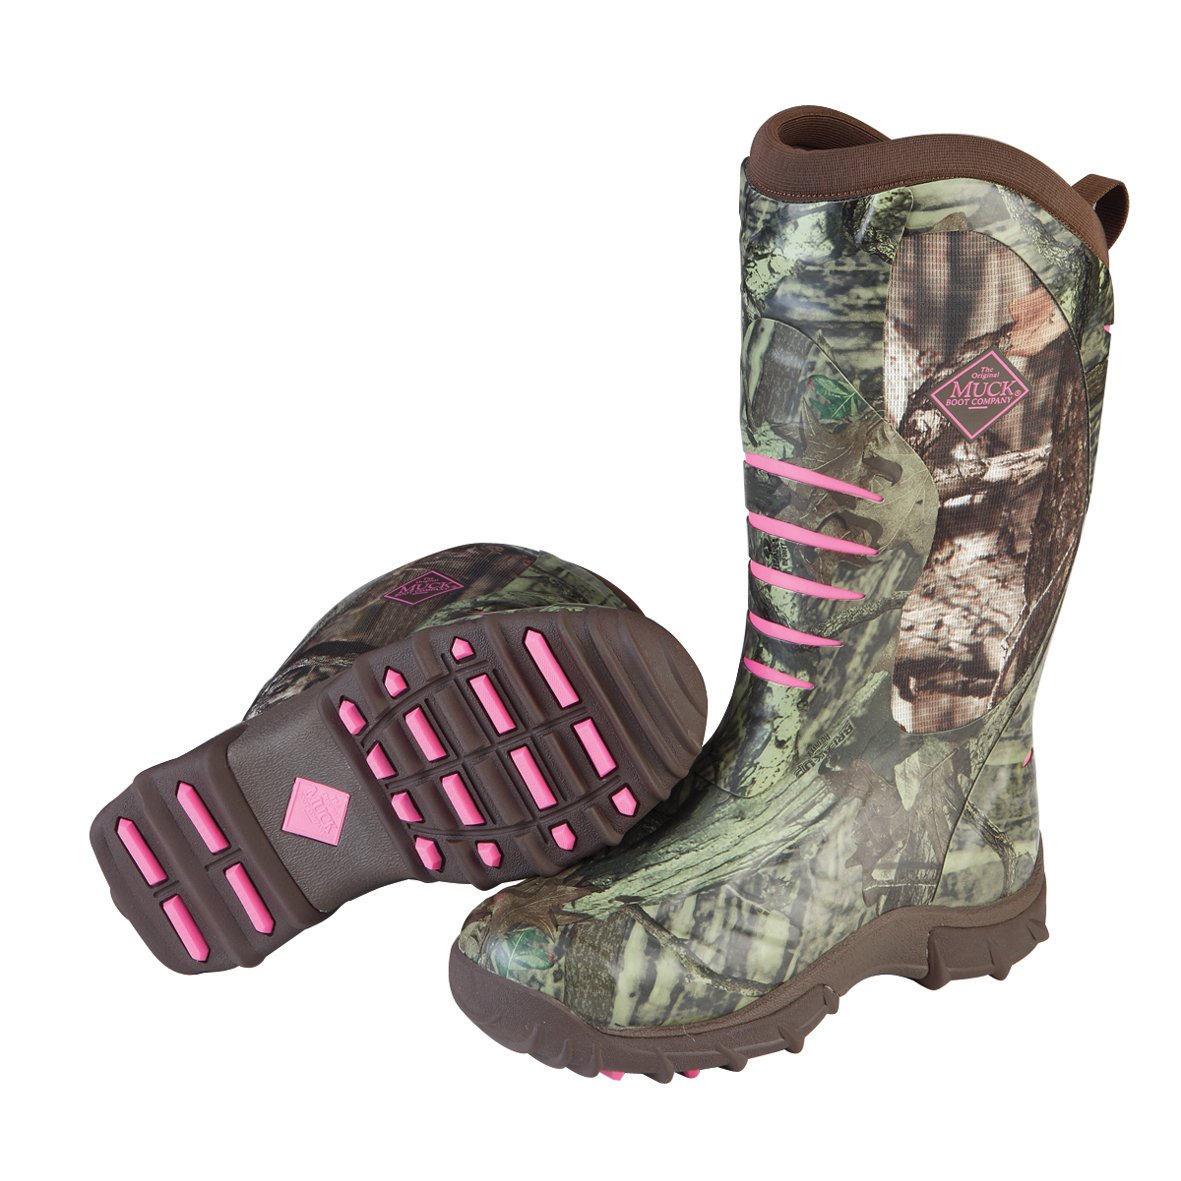 Muck Boot Pursuit Stealth Rubber Insulated Women's Hunting Boot | Fishing | Outdoor | Winter | Snow | Work